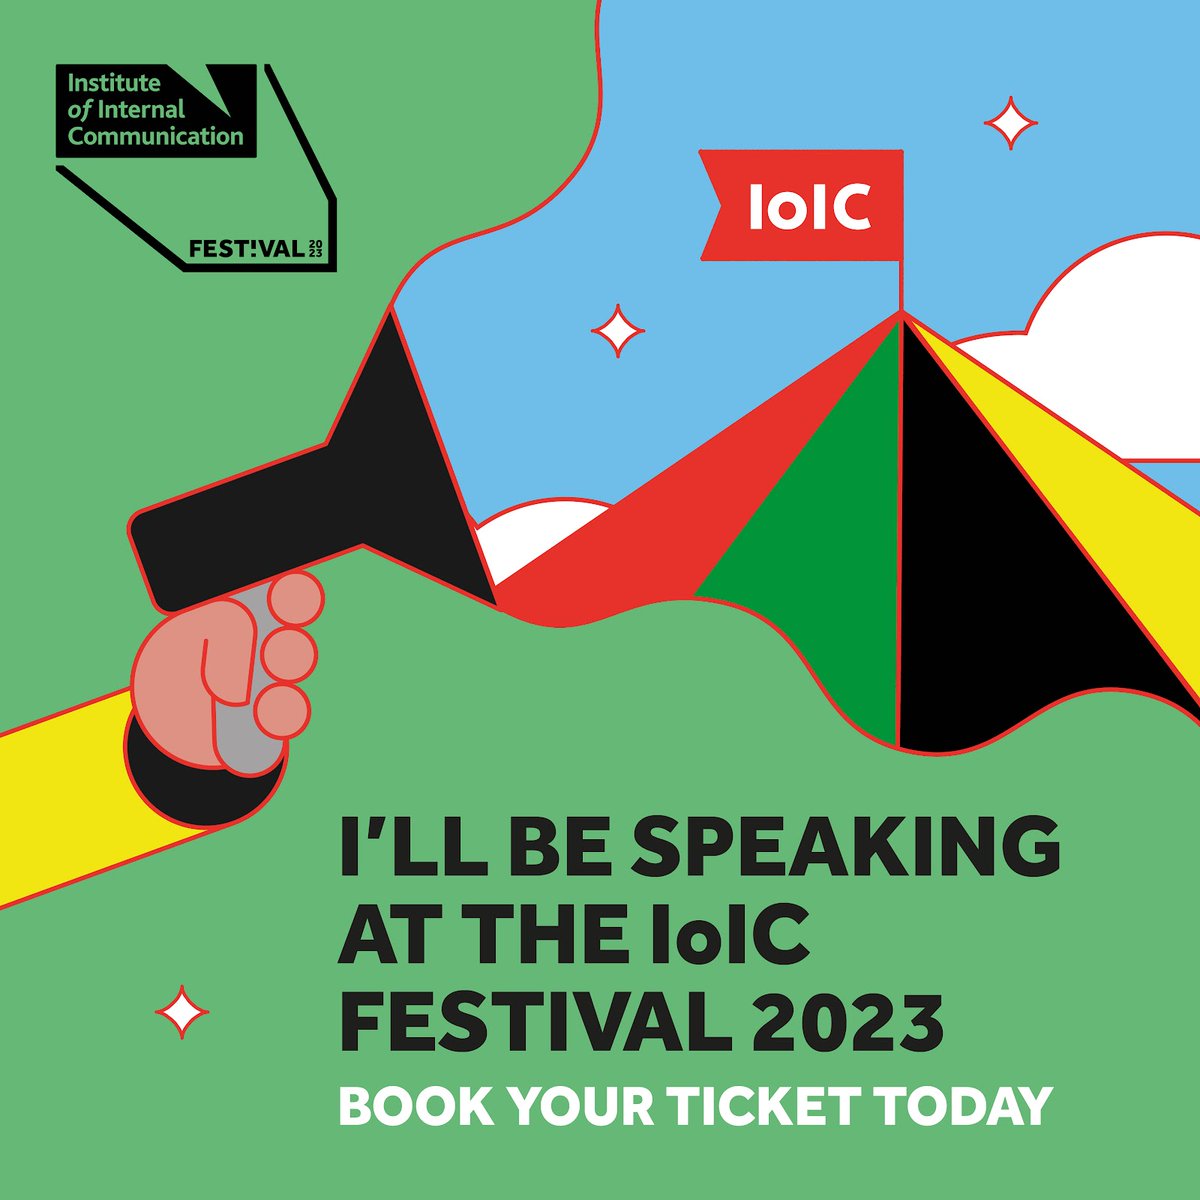 Speaking at #IoICFestival23 near my home in Hertfordshire. Pollen bomb canceled my walk to the venue, but ready to share credibility tips! Stay tuned for results tomorrow! Looking forward to meeting amazing attendees and hearing fellow speakers. #leadership #credibility #speaker